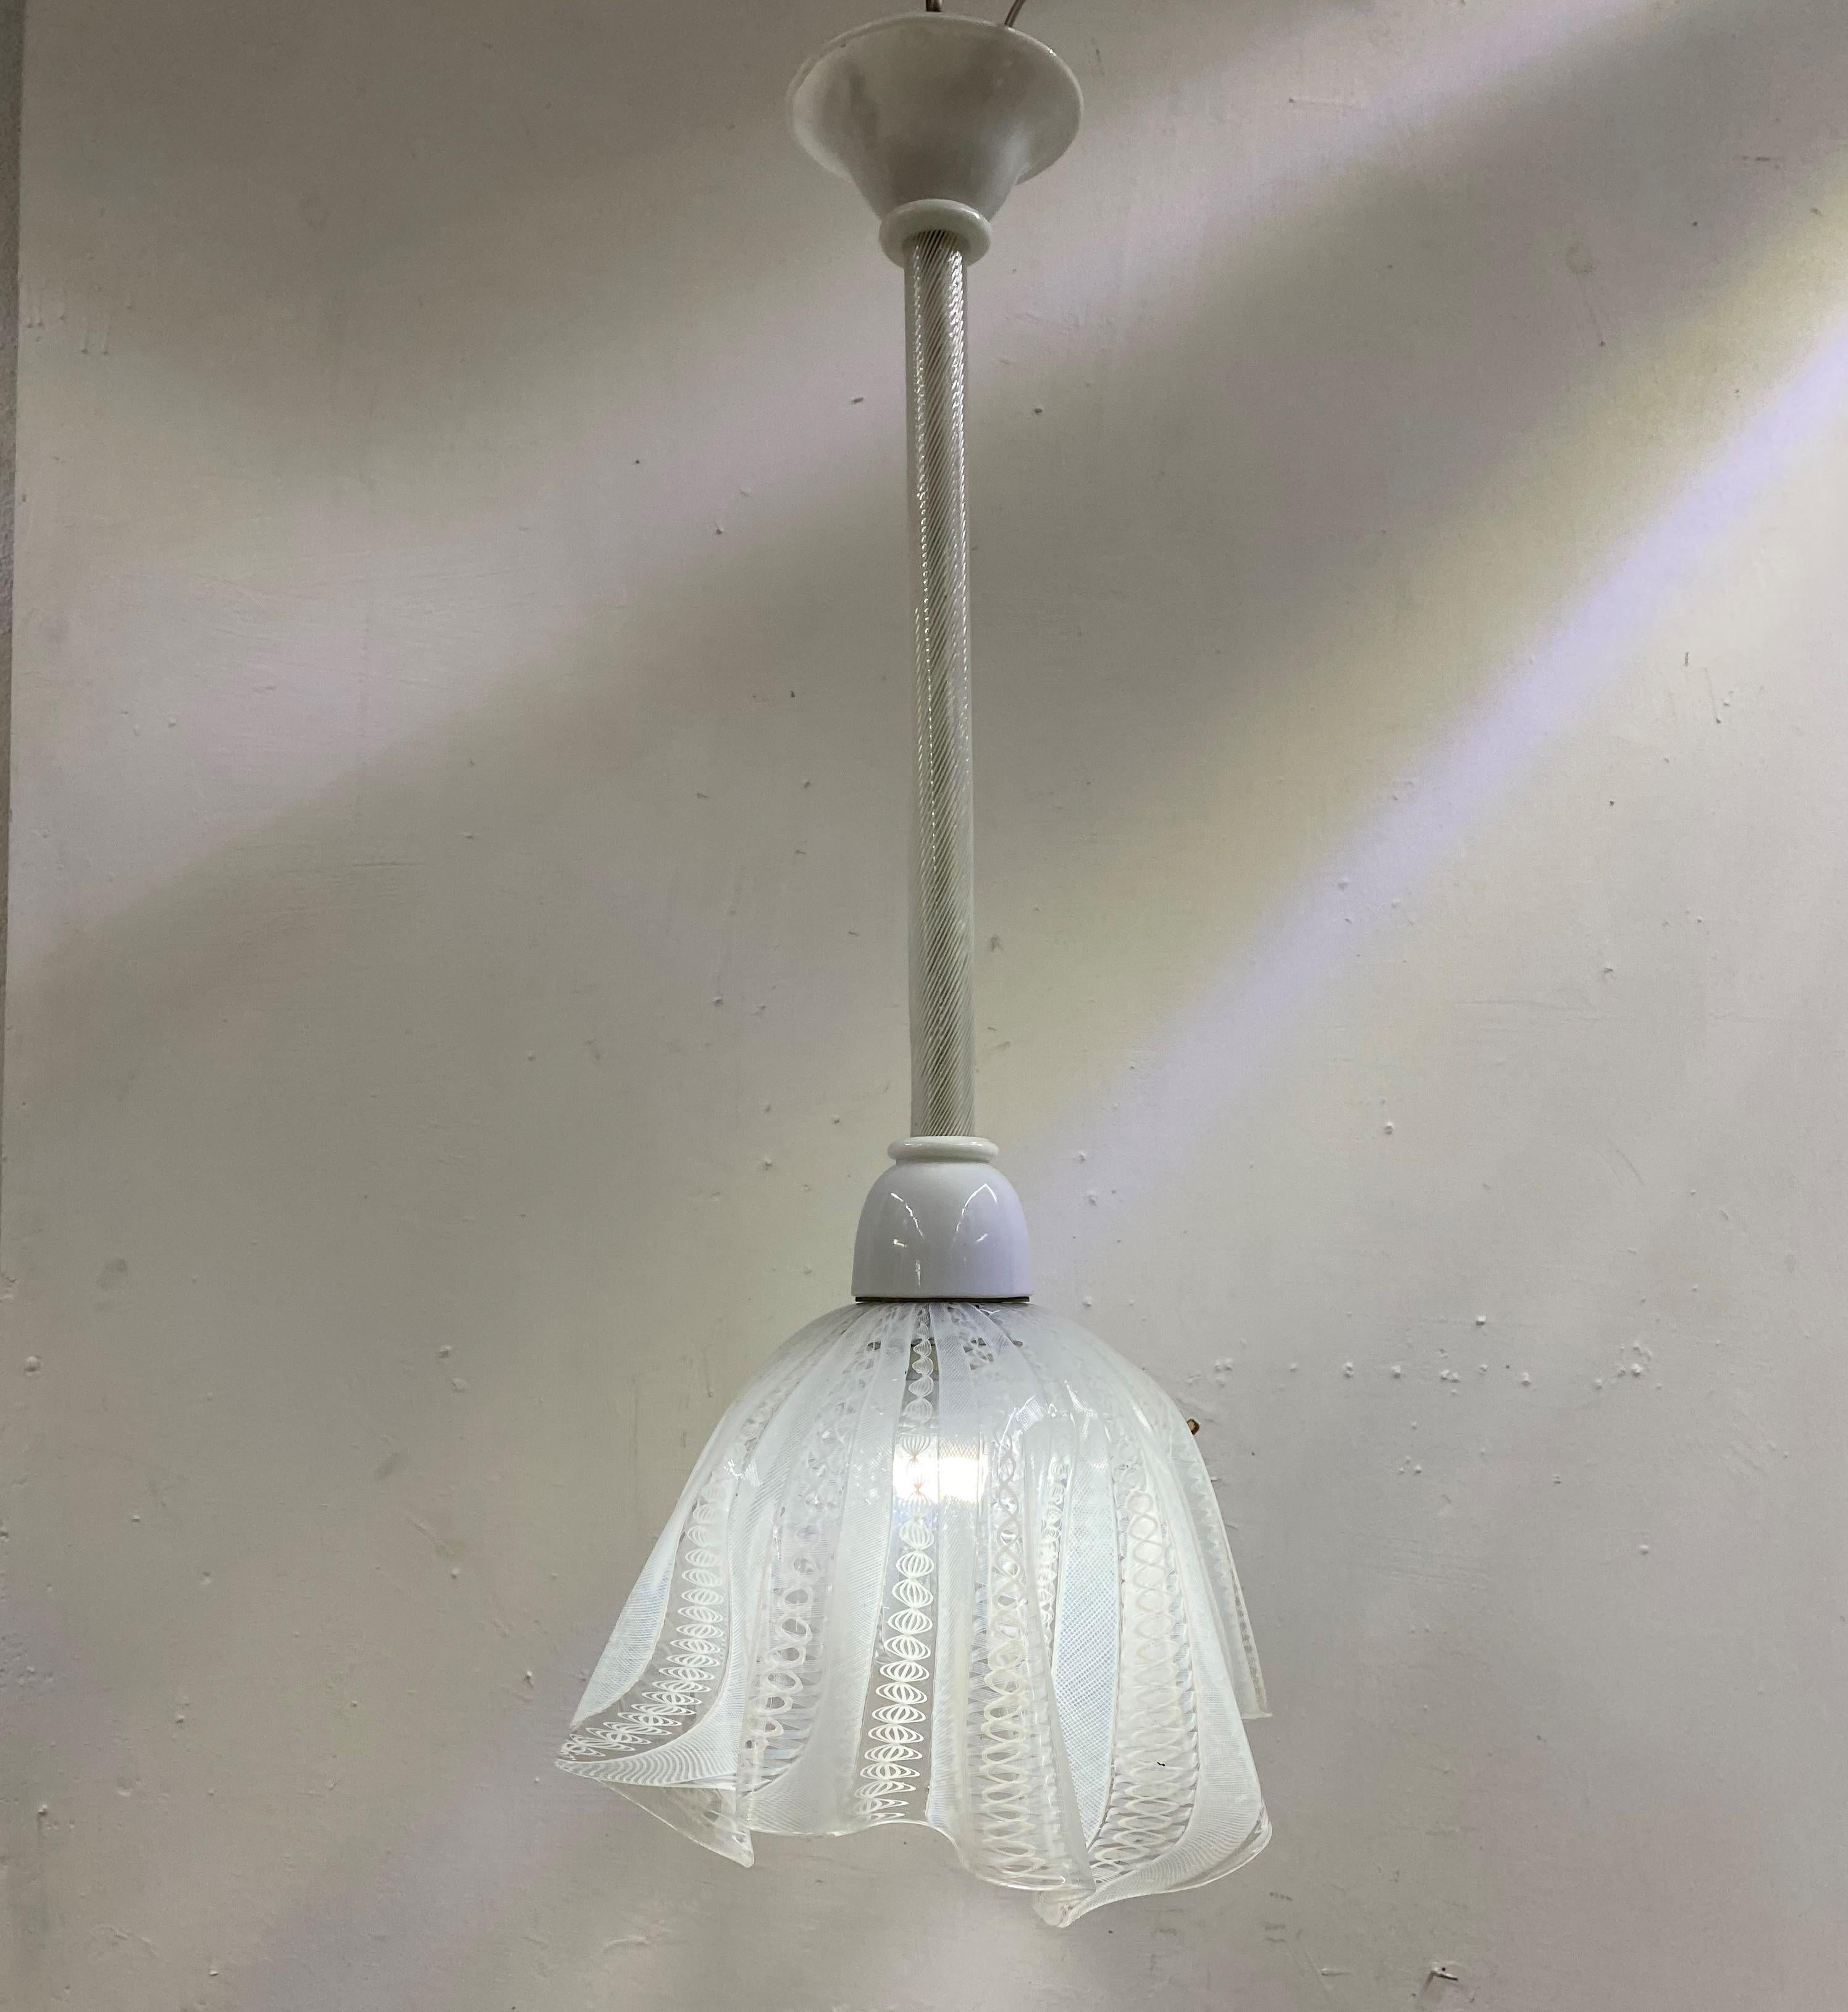 Beautiful Mid-Century Modern pendant light or lantern designed by Fulvio Bianconi for Venini in white Murano glass.
The shade of the chandelier is called 